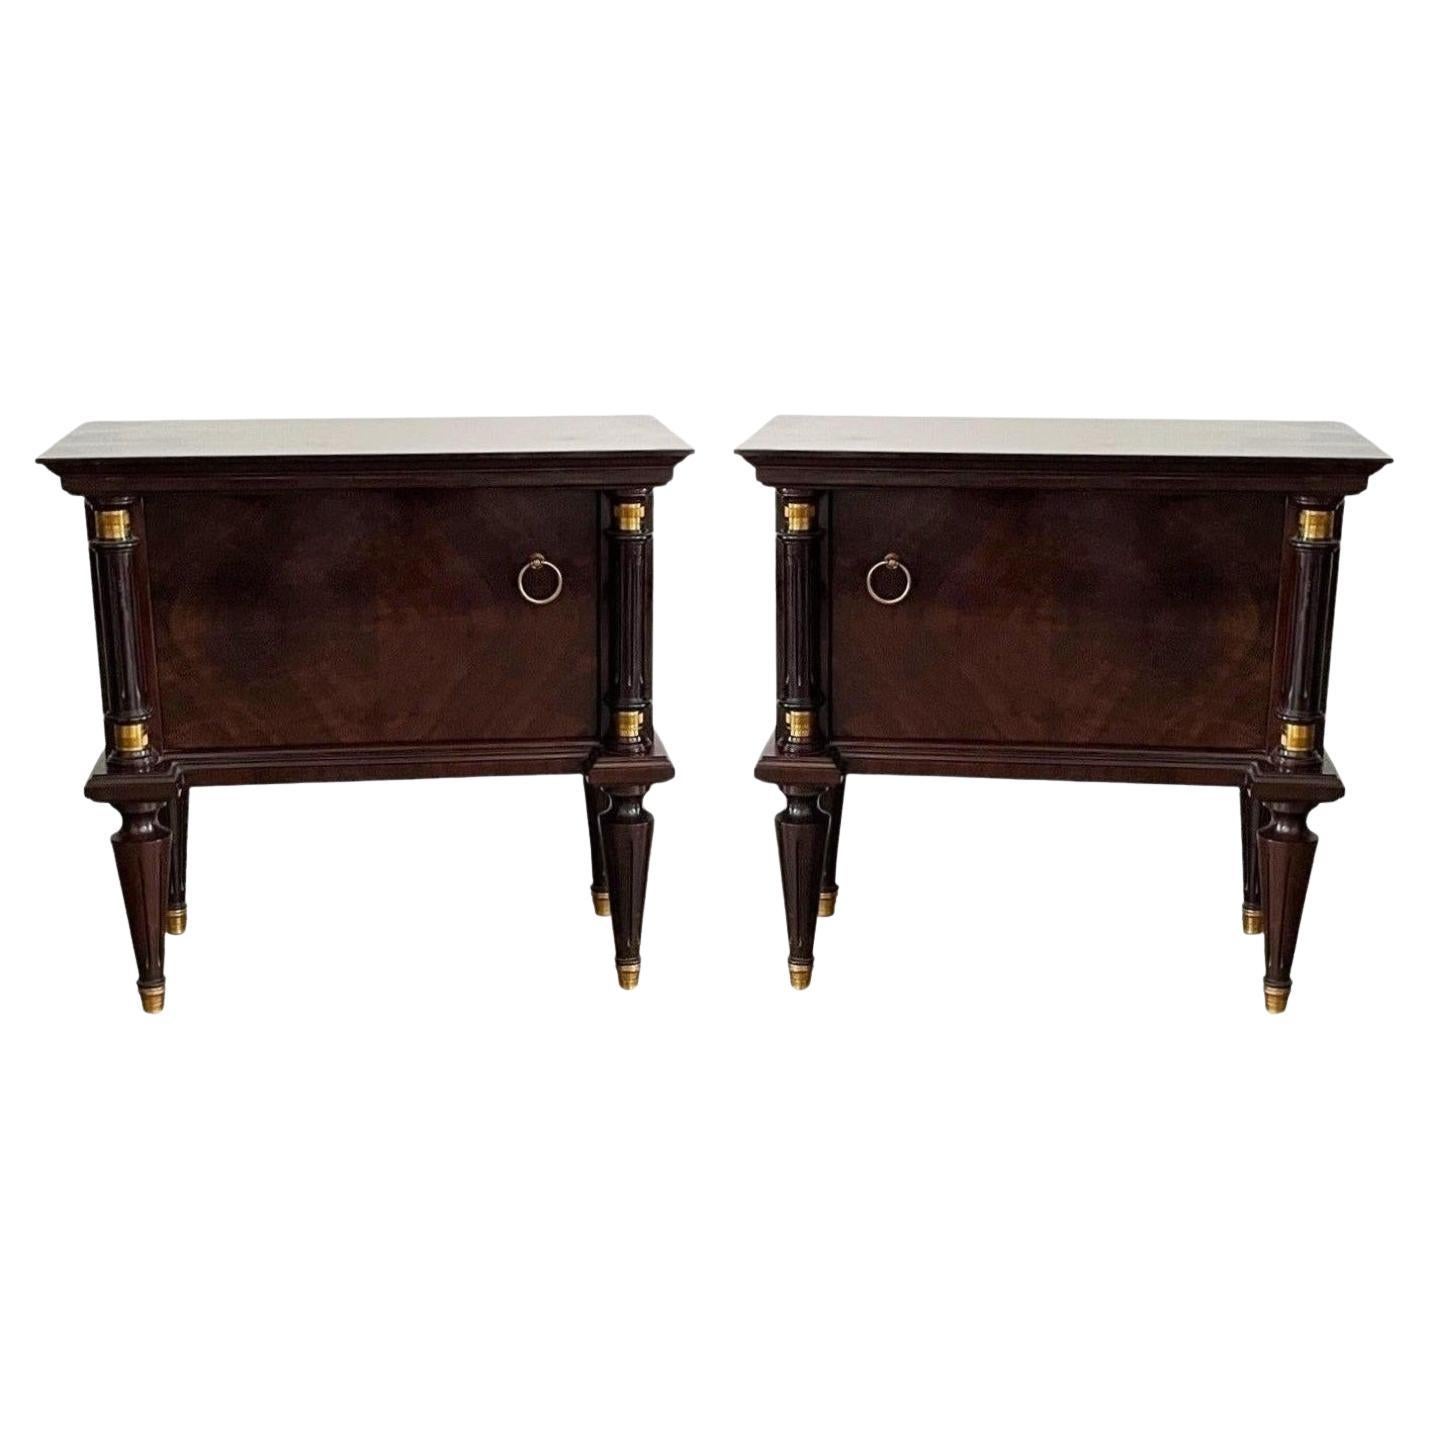 Early 20th Century Italian Neoclassical Pair of Bedside Tables in Mahogany For Sale